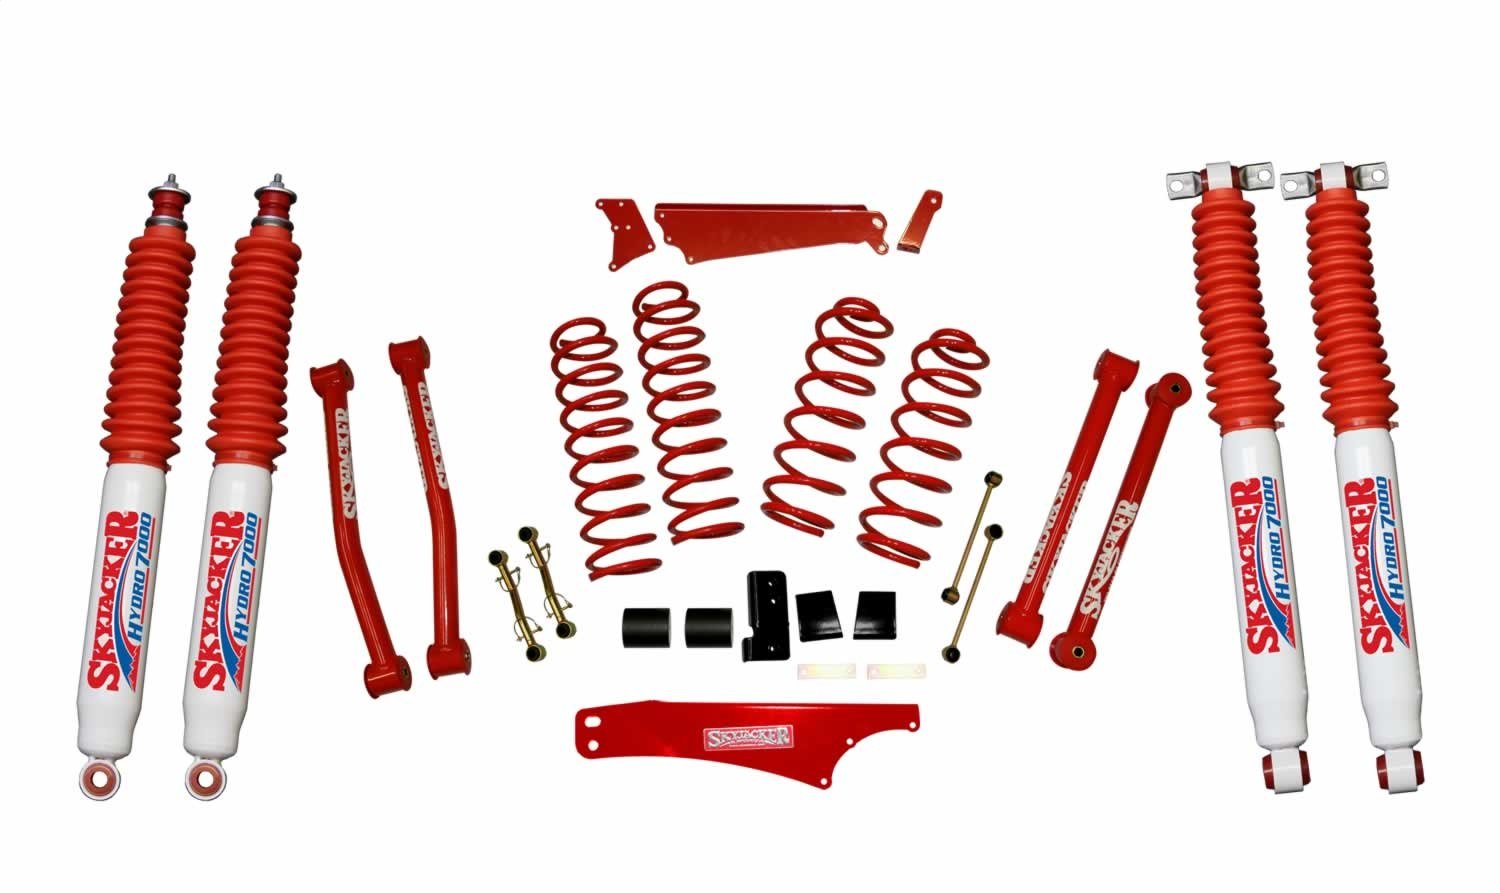 JK401KCR-H Front and Rear Suspension Lift Kit, Lift Amount: 4-5 in. Front/4-5 in. Rear